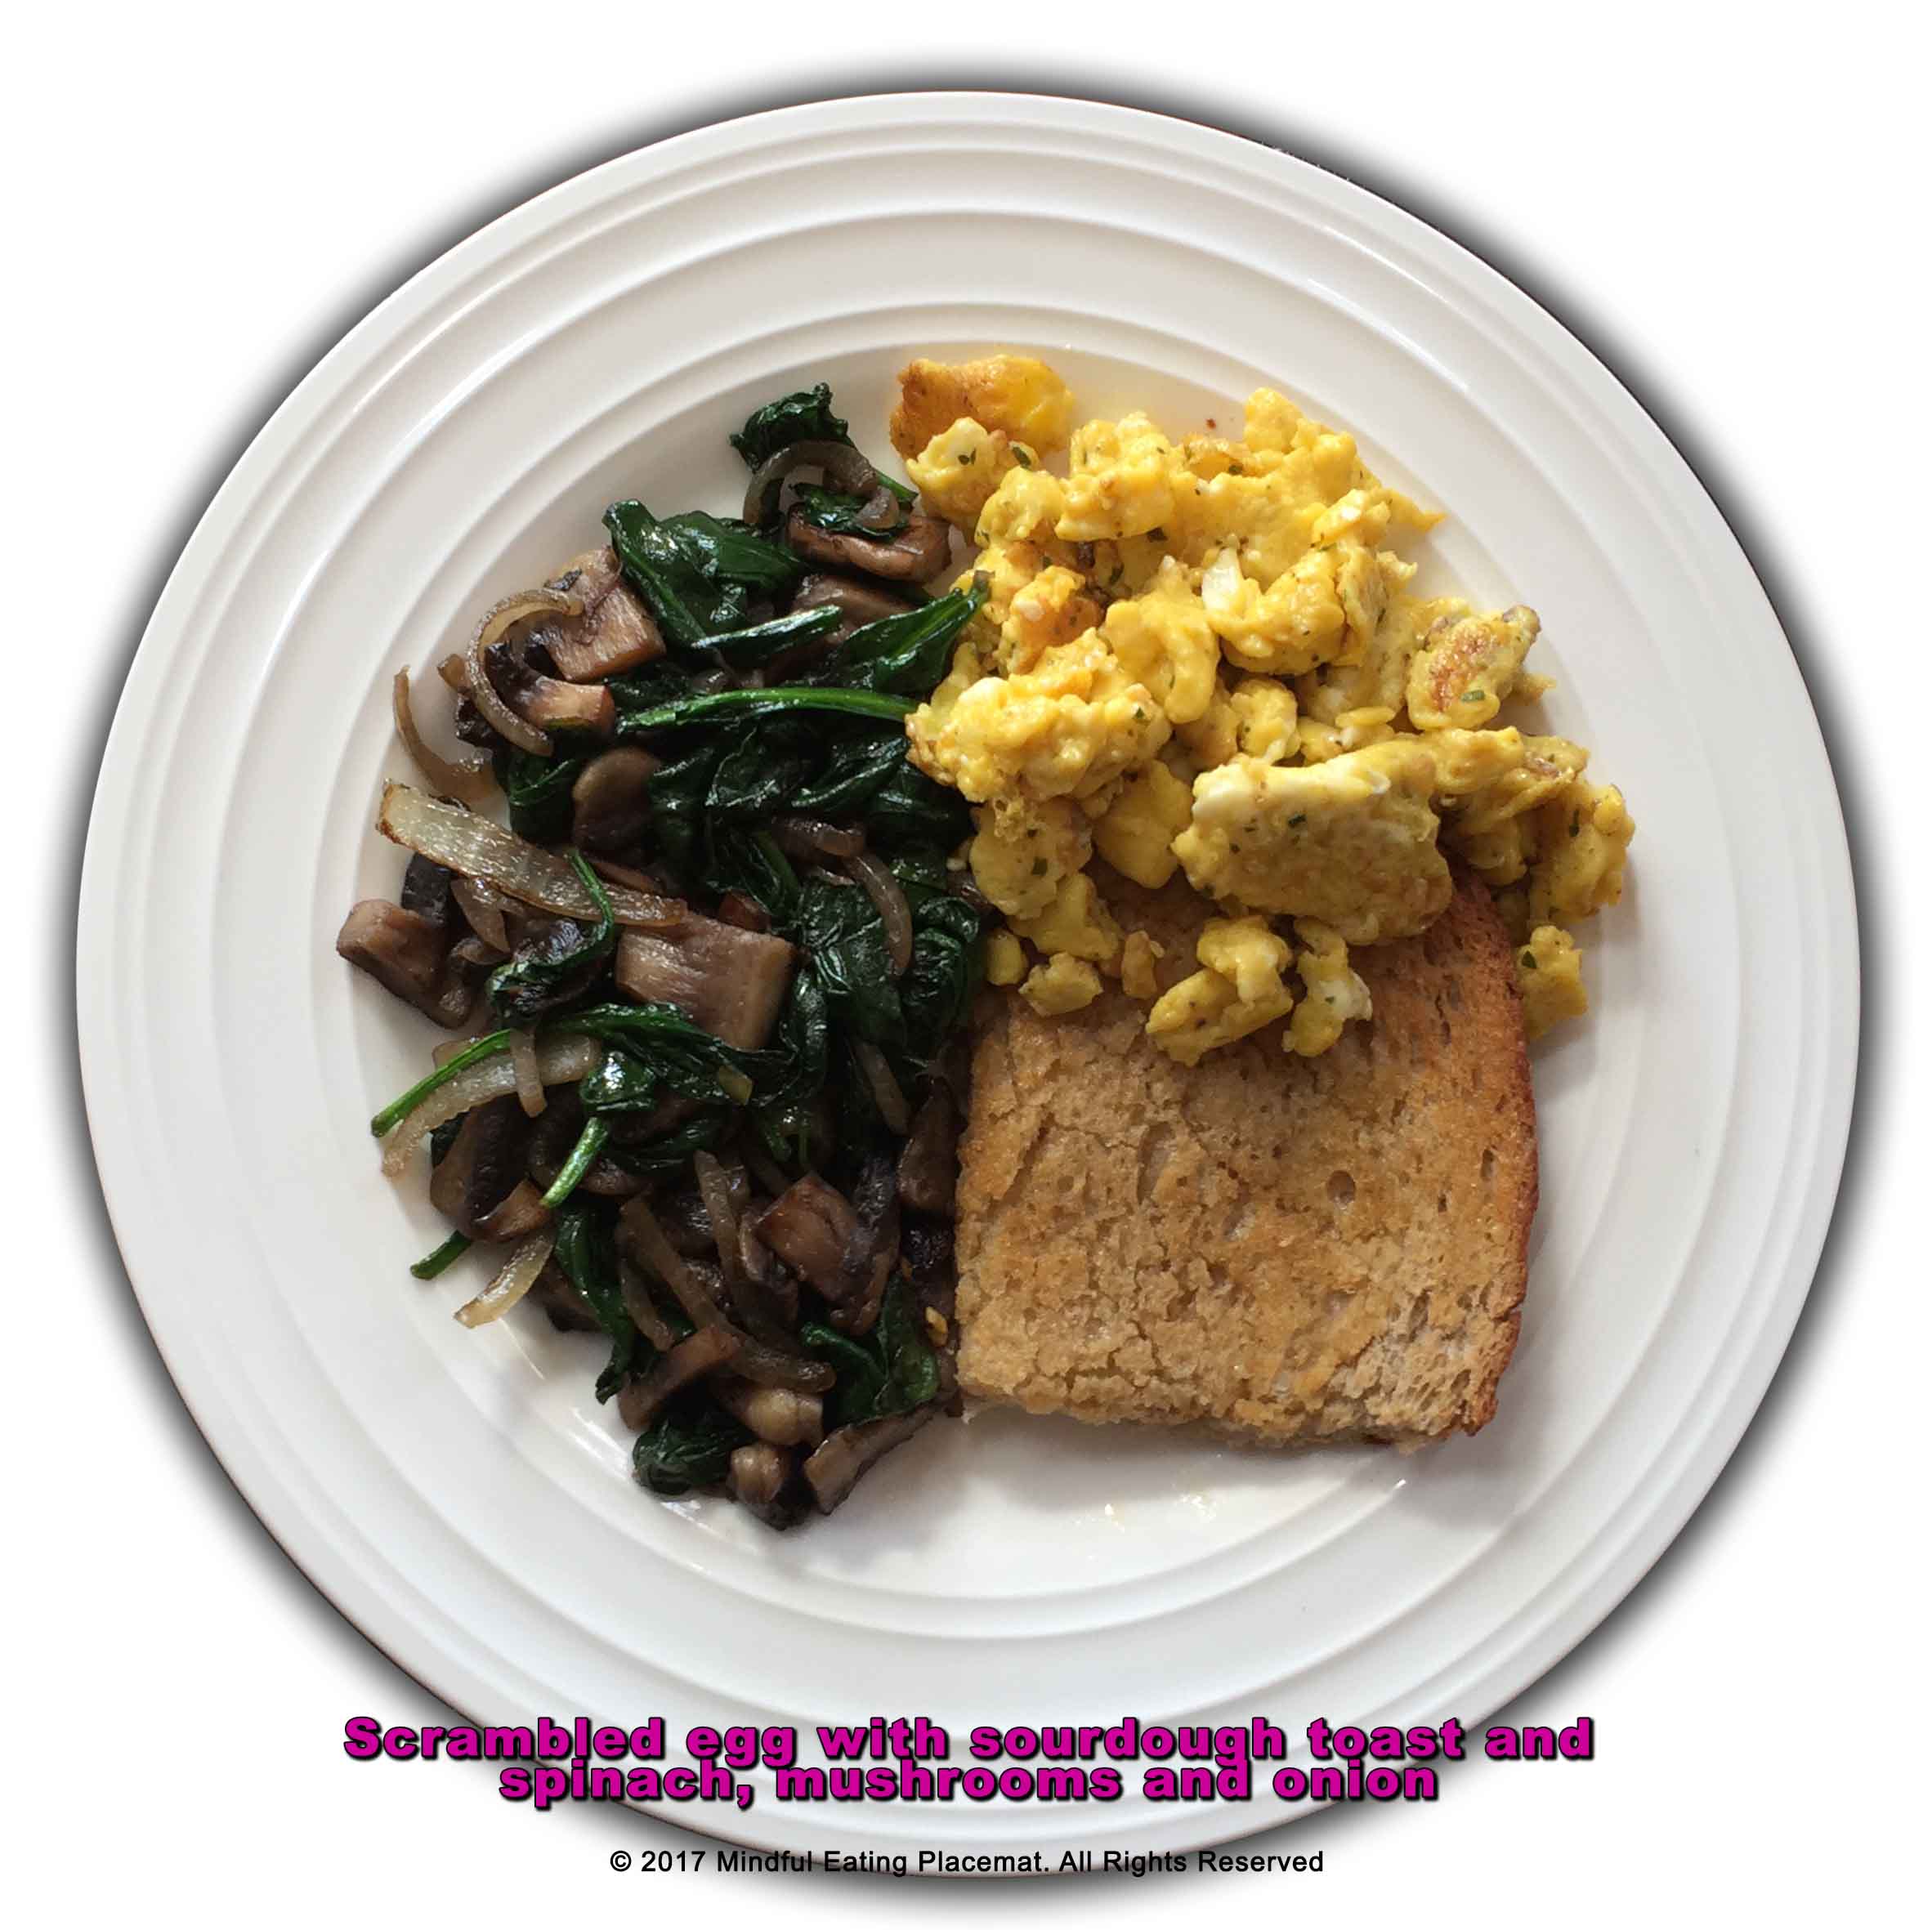 One scrambled egg, with sourdough toast and mushrooms and spinach